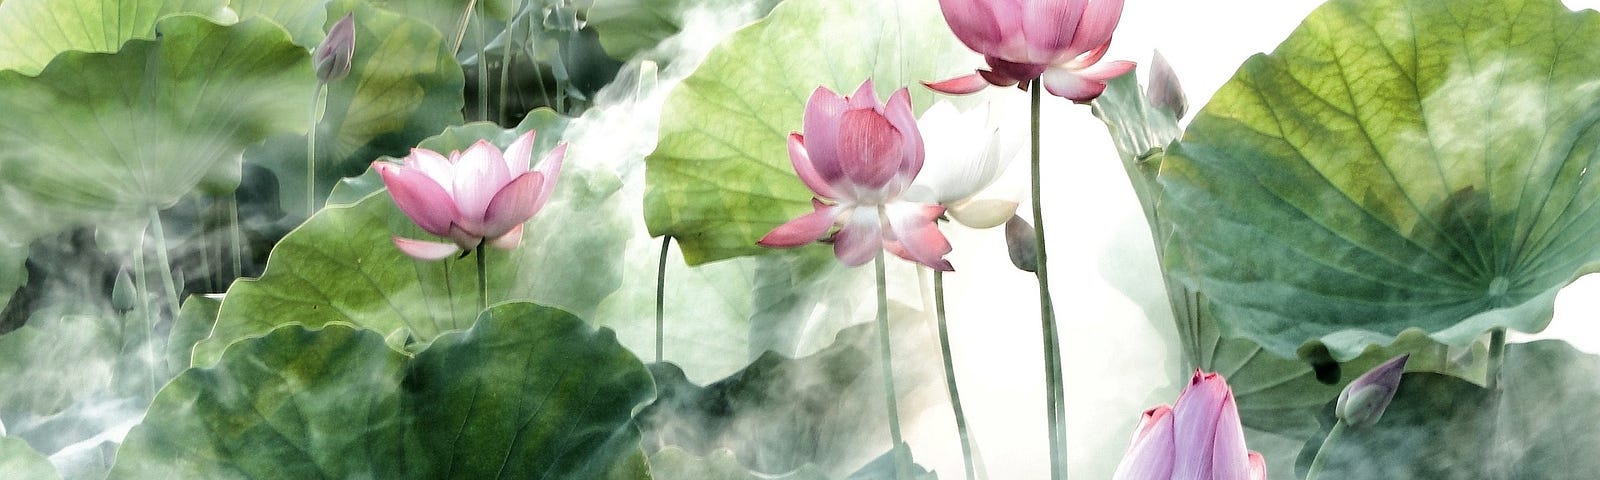 AI-generated artwork of long-stemmed, pink water lilies rising above green lily pads surrounded by mist.